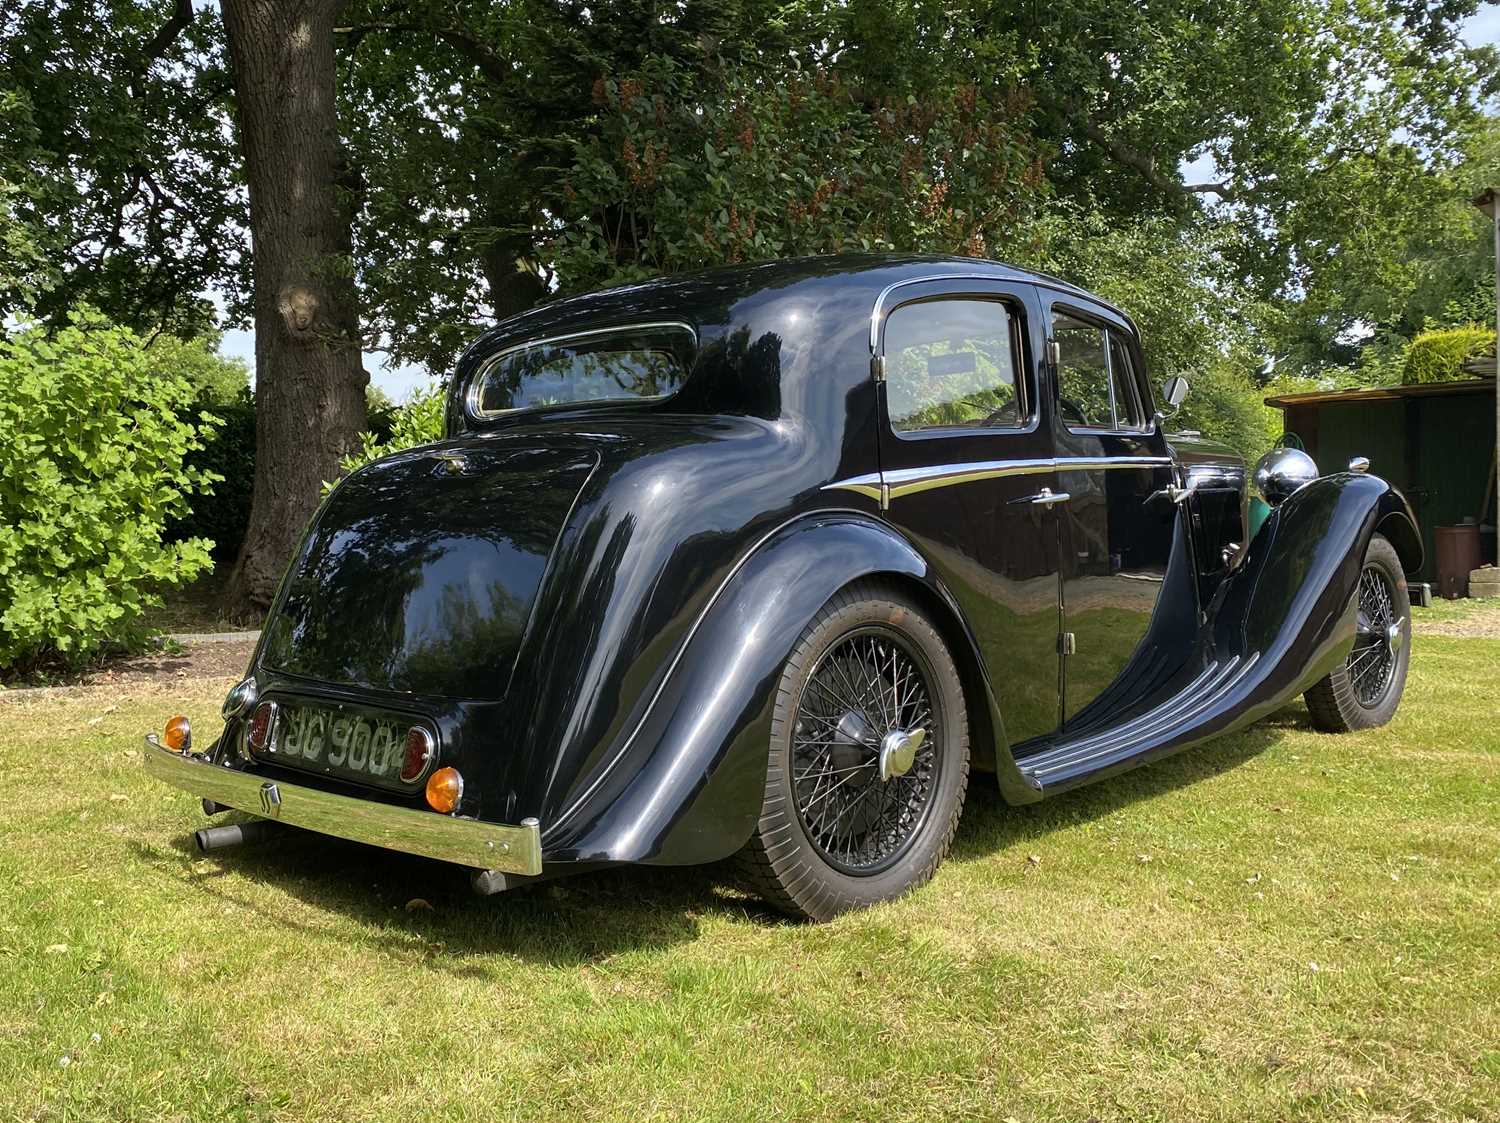 1937 Jaguar SS 1½-Litre Saloon Meticulously restored - Image 20 of 52